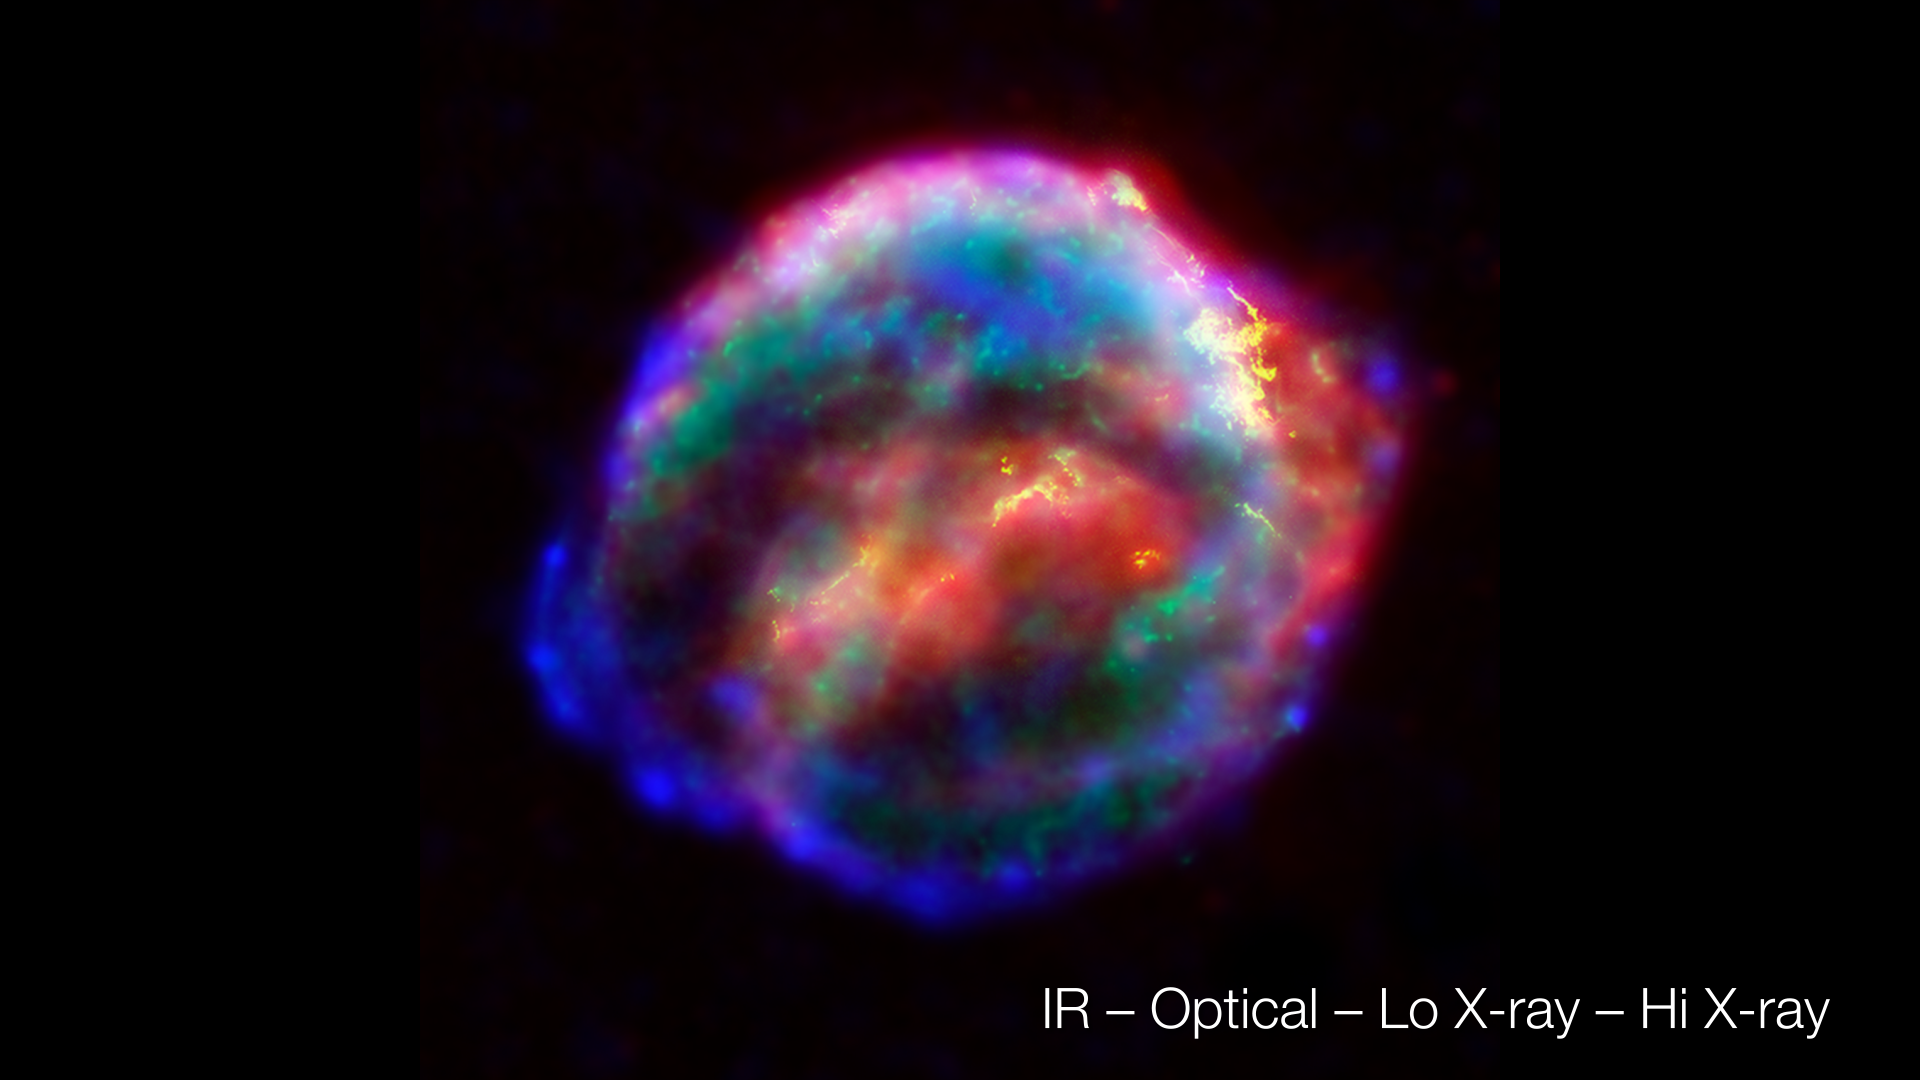 Infrared, optical, lo X-ray, and hi X-ray images of Supernova Remnant combined